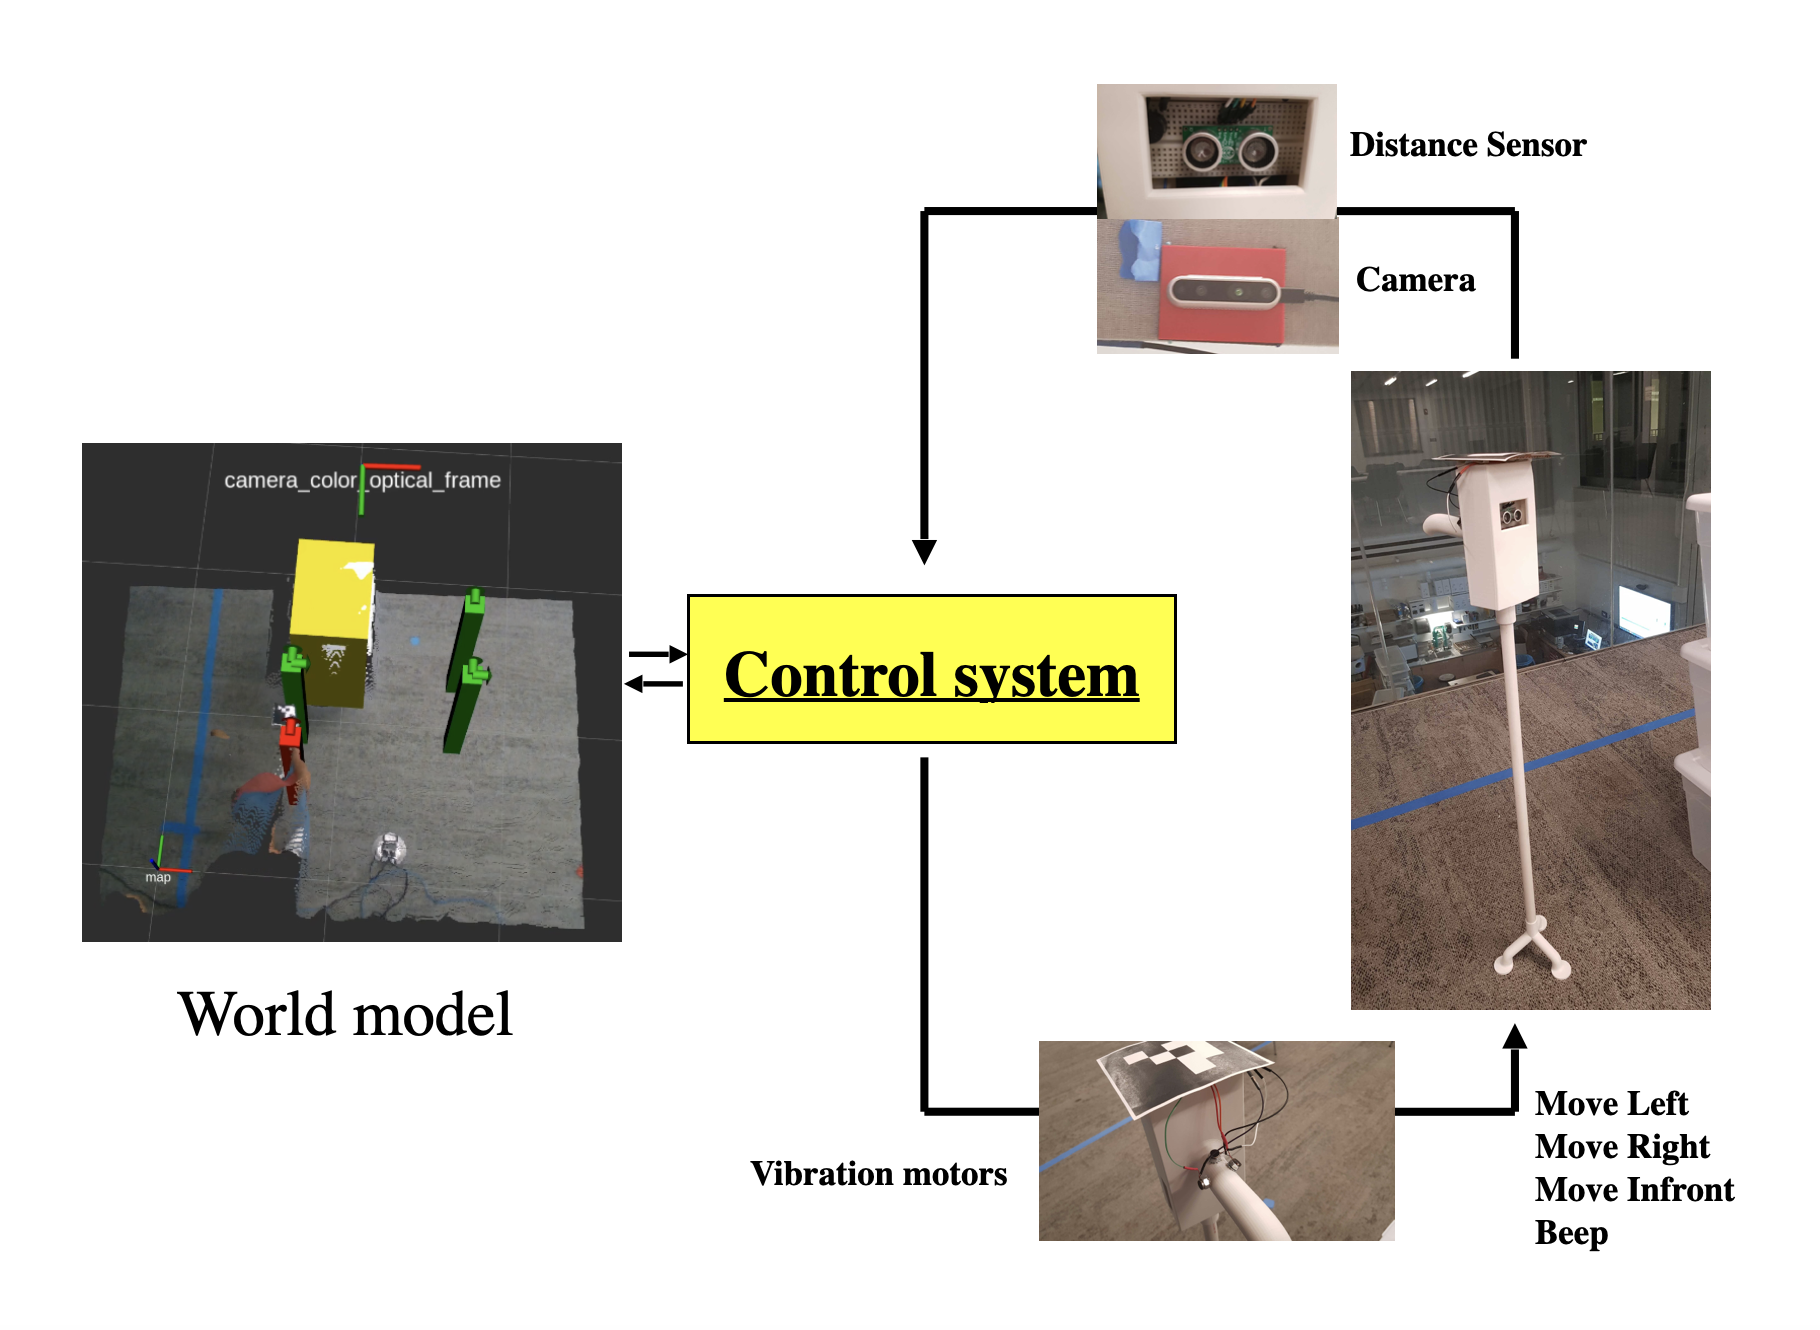 A diagram showing the world model on the left and bidirectional arrows between the world model and the control system. The control system has a cycle with an arrow pointing to the vibration motor, actions such as 'move left, right, in front, and beep', another arrow pointing to the entire smart cane, another arrow pointing to the distance sensor and camera, and another arrow pointing back to the control system.